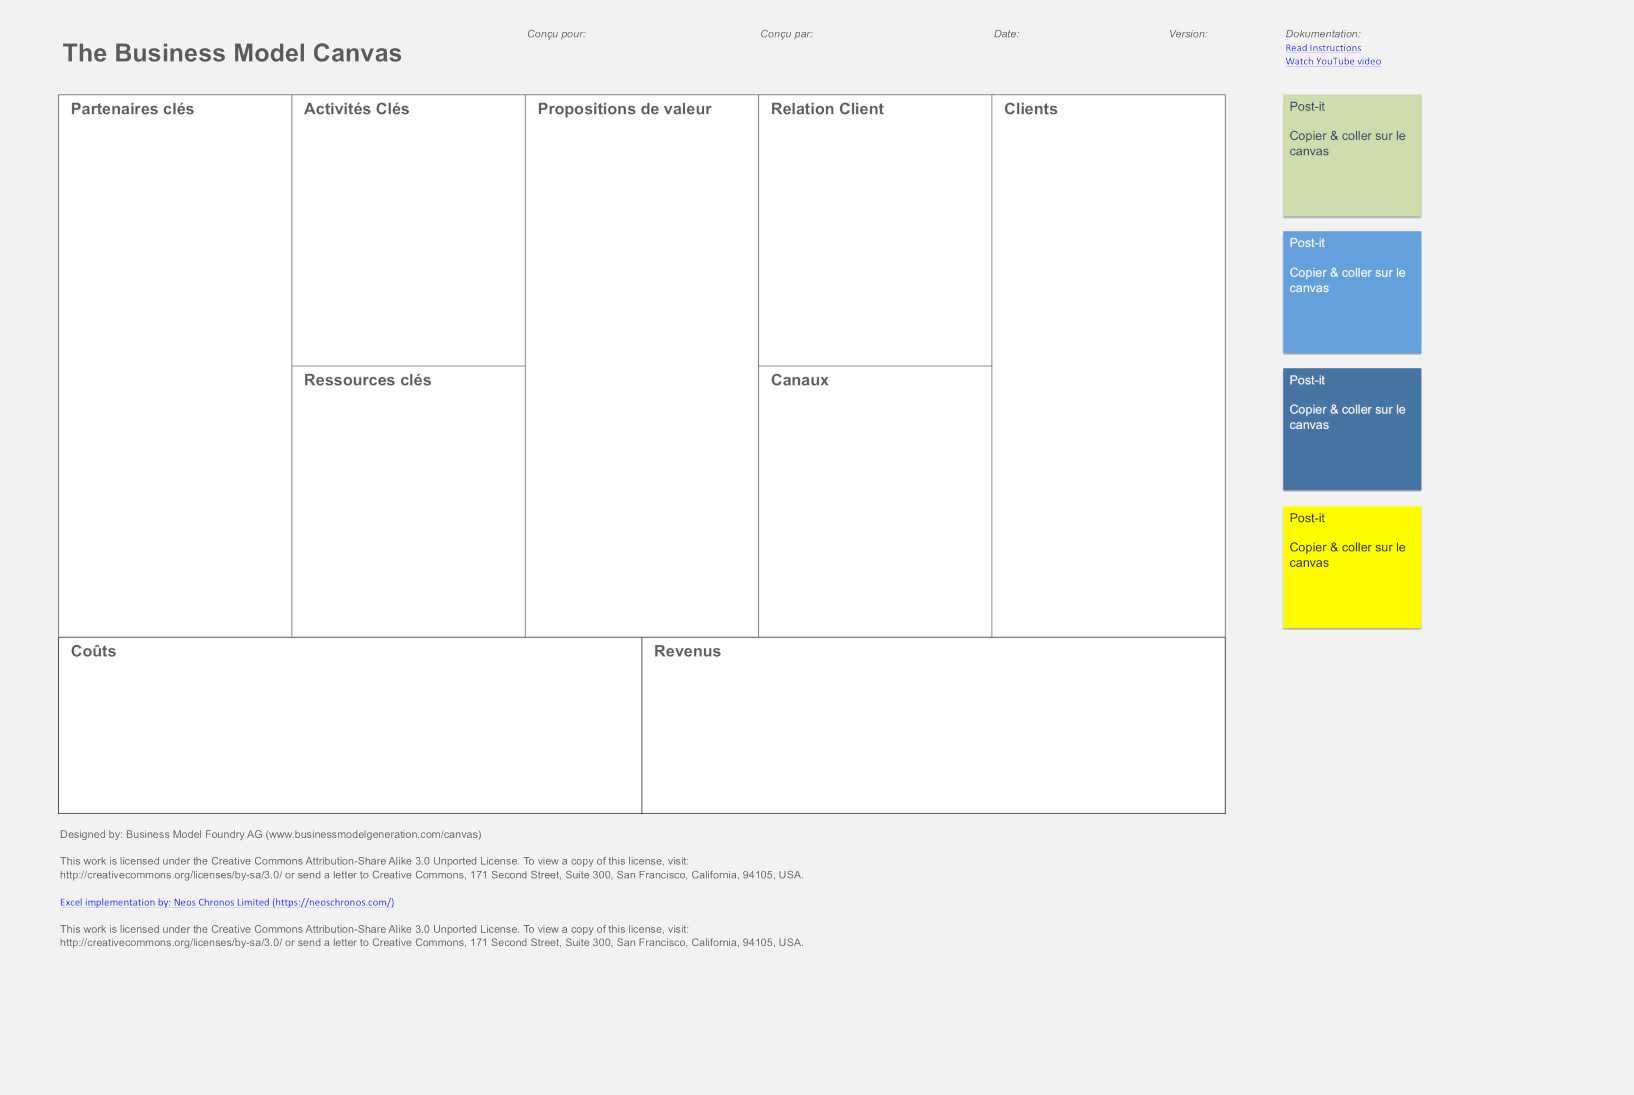 036 Business Model Canvas Template Word Doc Ideas Value With Regard To Business Model Canvas Template Word